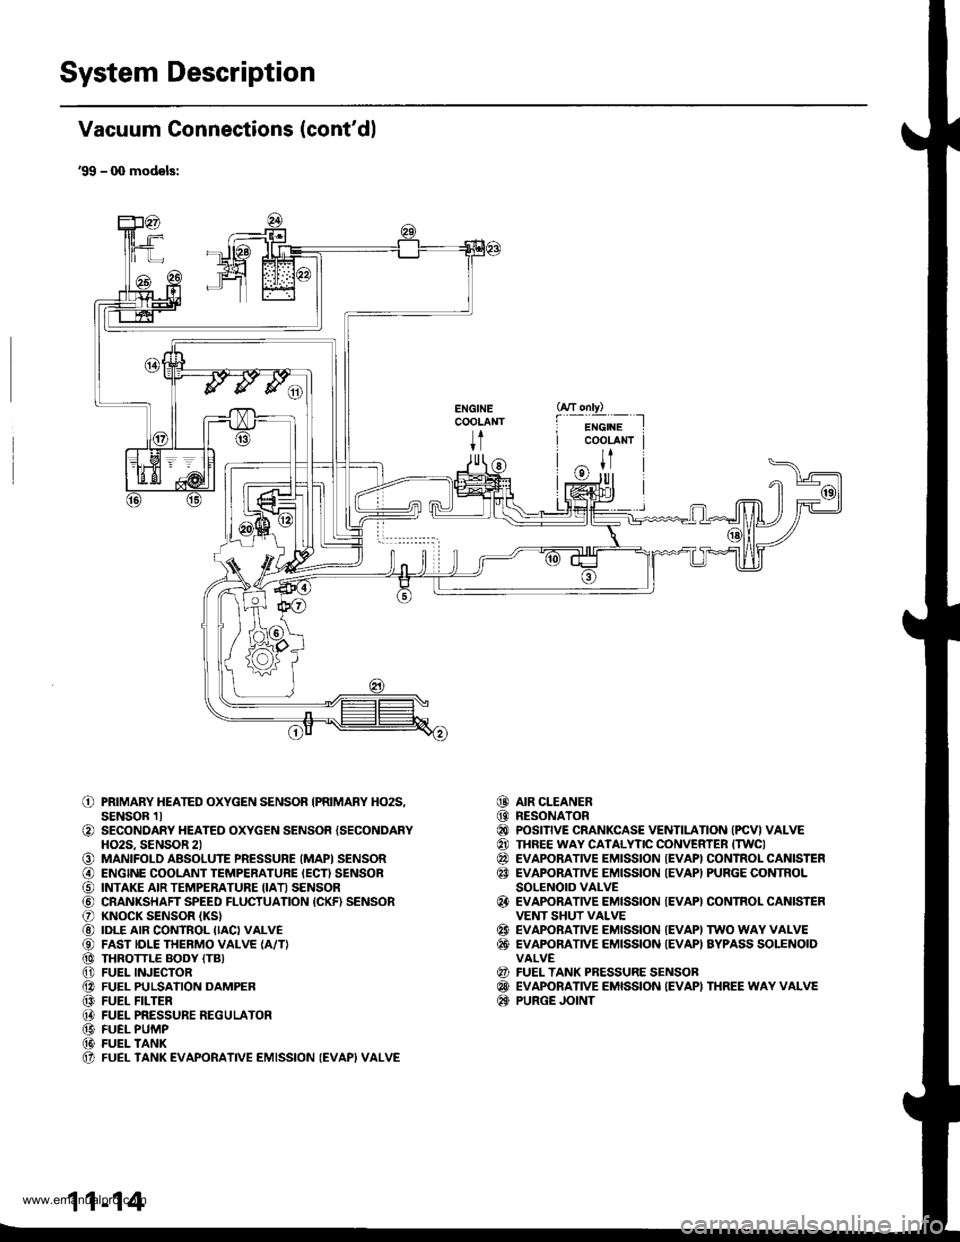 HONDA CR-V 1999 RD1-RD3 / 1.G Workshop Manual 
System Description
Vacuum Connections (contdl
99 - q) models:
ENGINECOOLANT
t
o
o
o@
o@@@@@@@@@(t
PRIMARY HEATED OXYGEN SENSOR IPRIMARY HO2S,SENSOR 1lSECONDARY HEATED OXYGEN SENSOR {SECONDARYHO2S. 